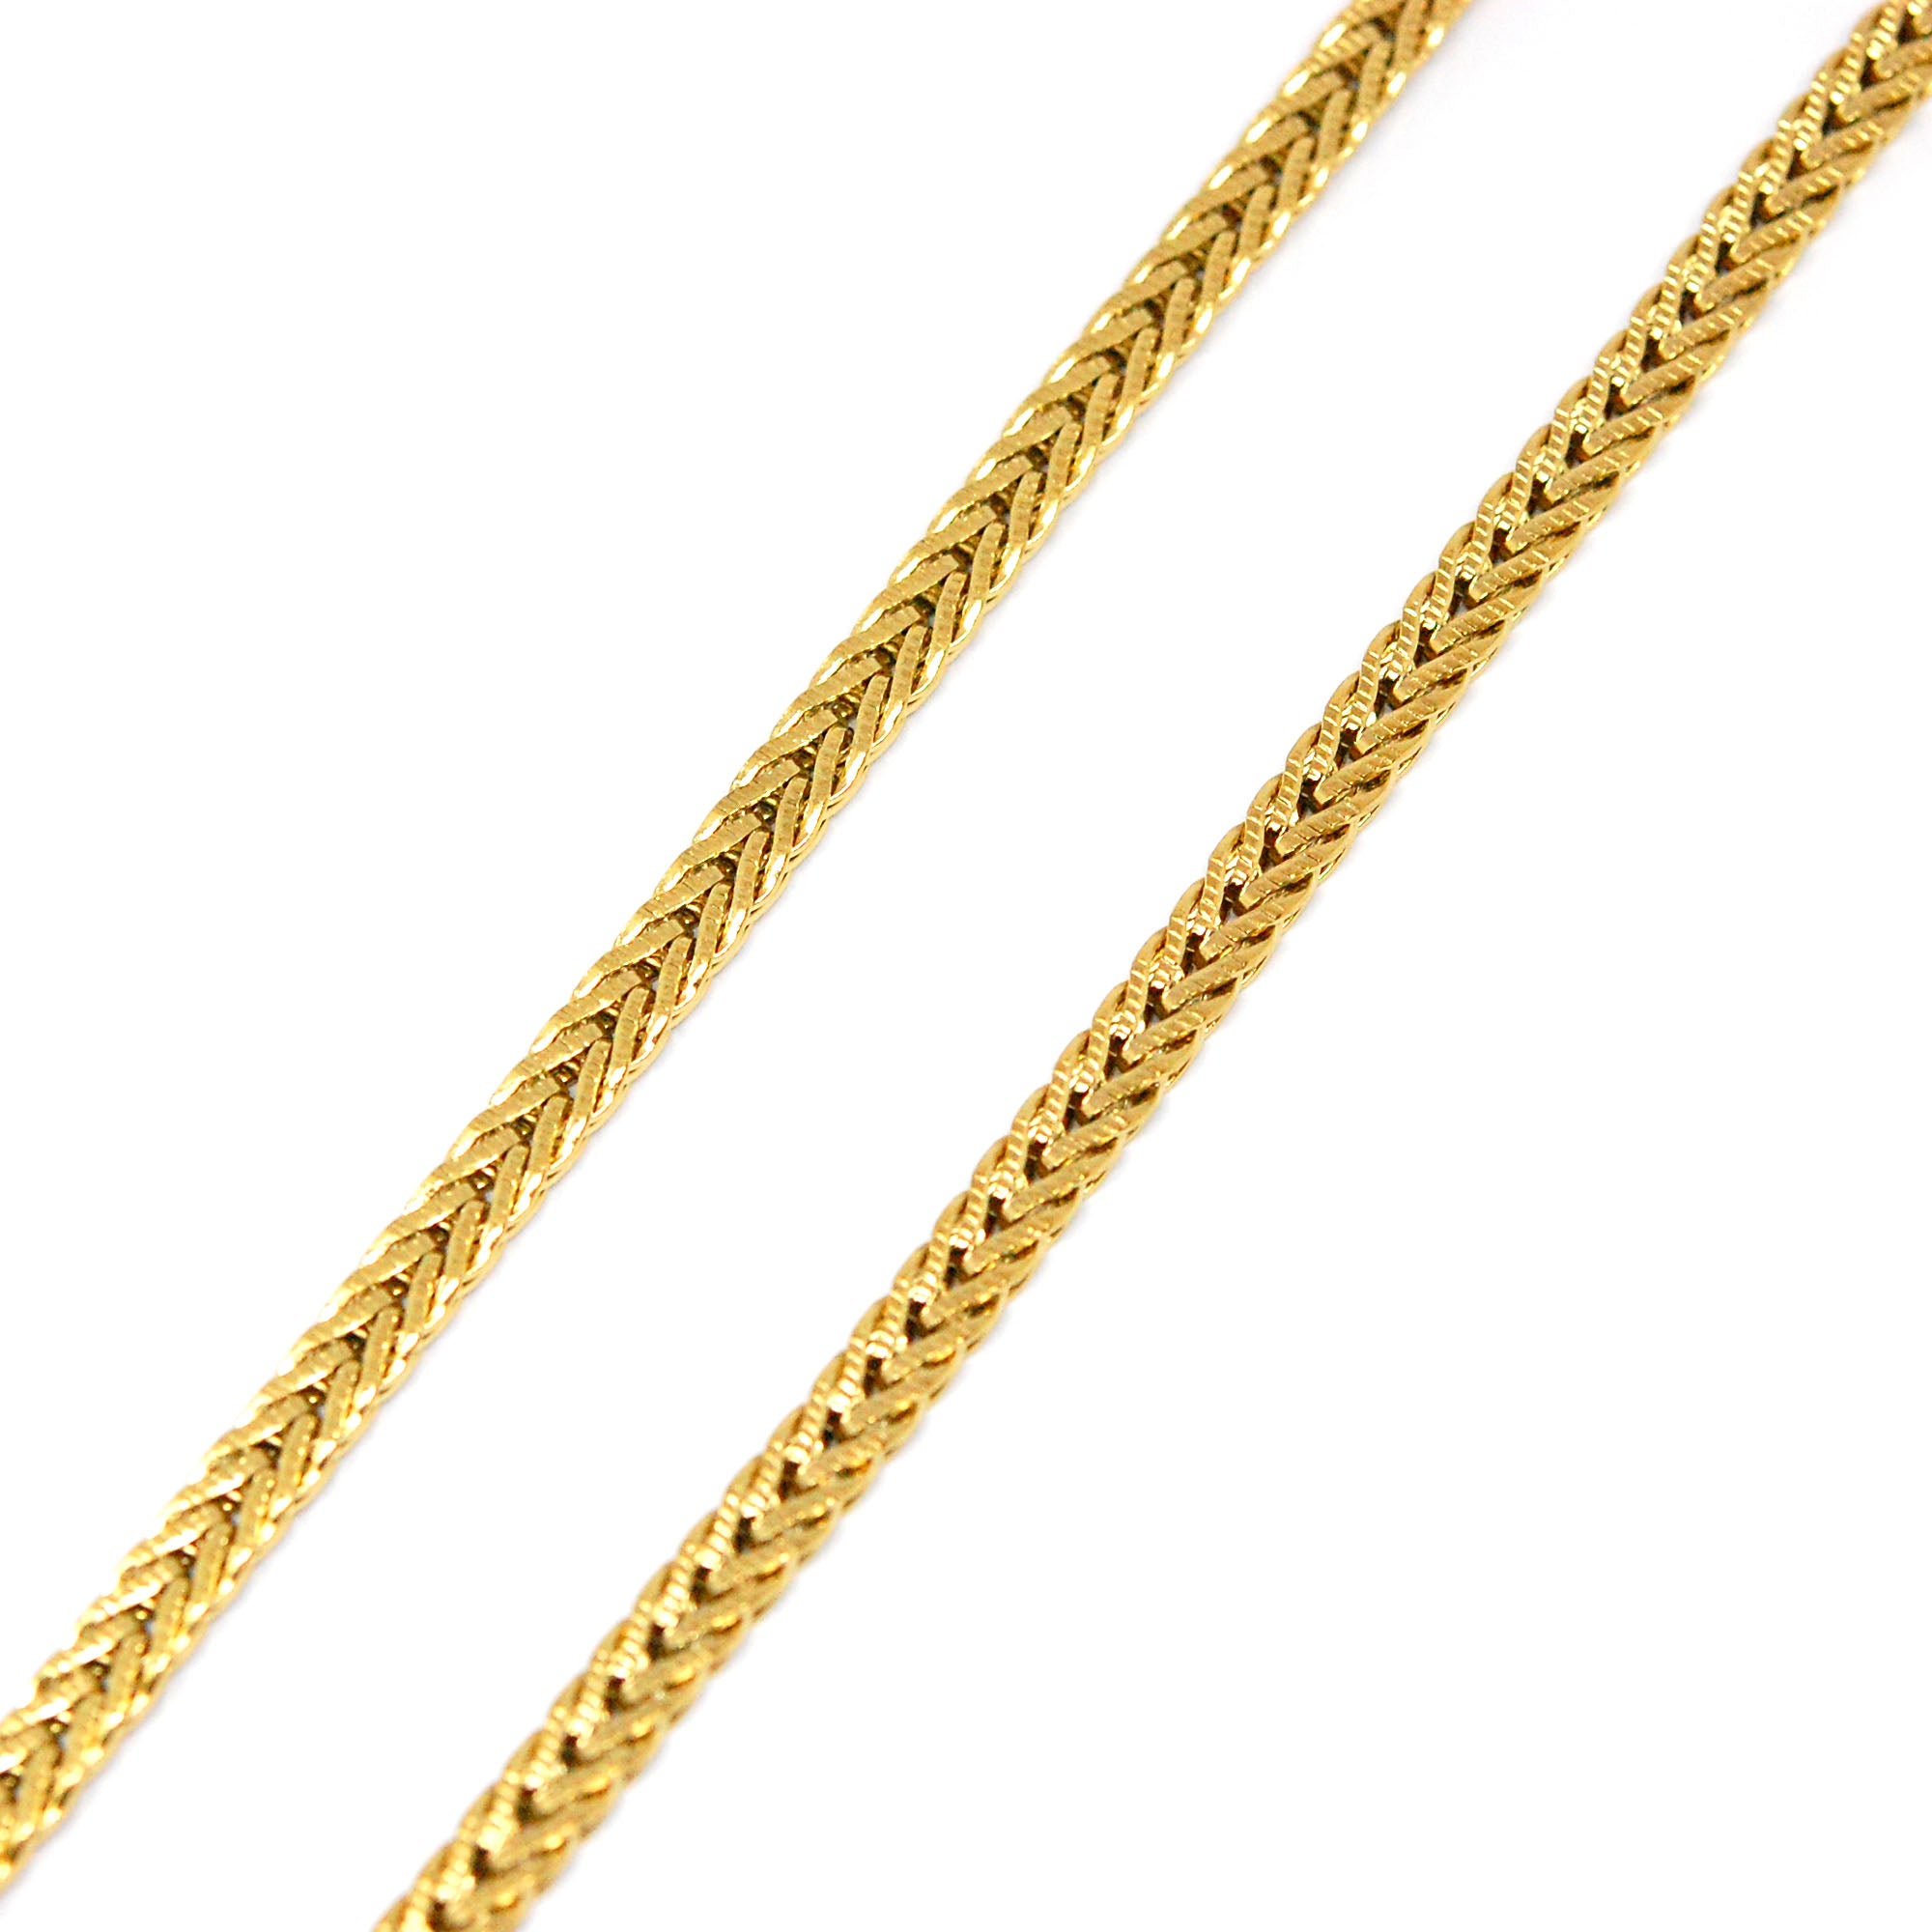 ESCH 7756: 22.5" All IPG Beautifully Etched Wheat Chain (5mm)